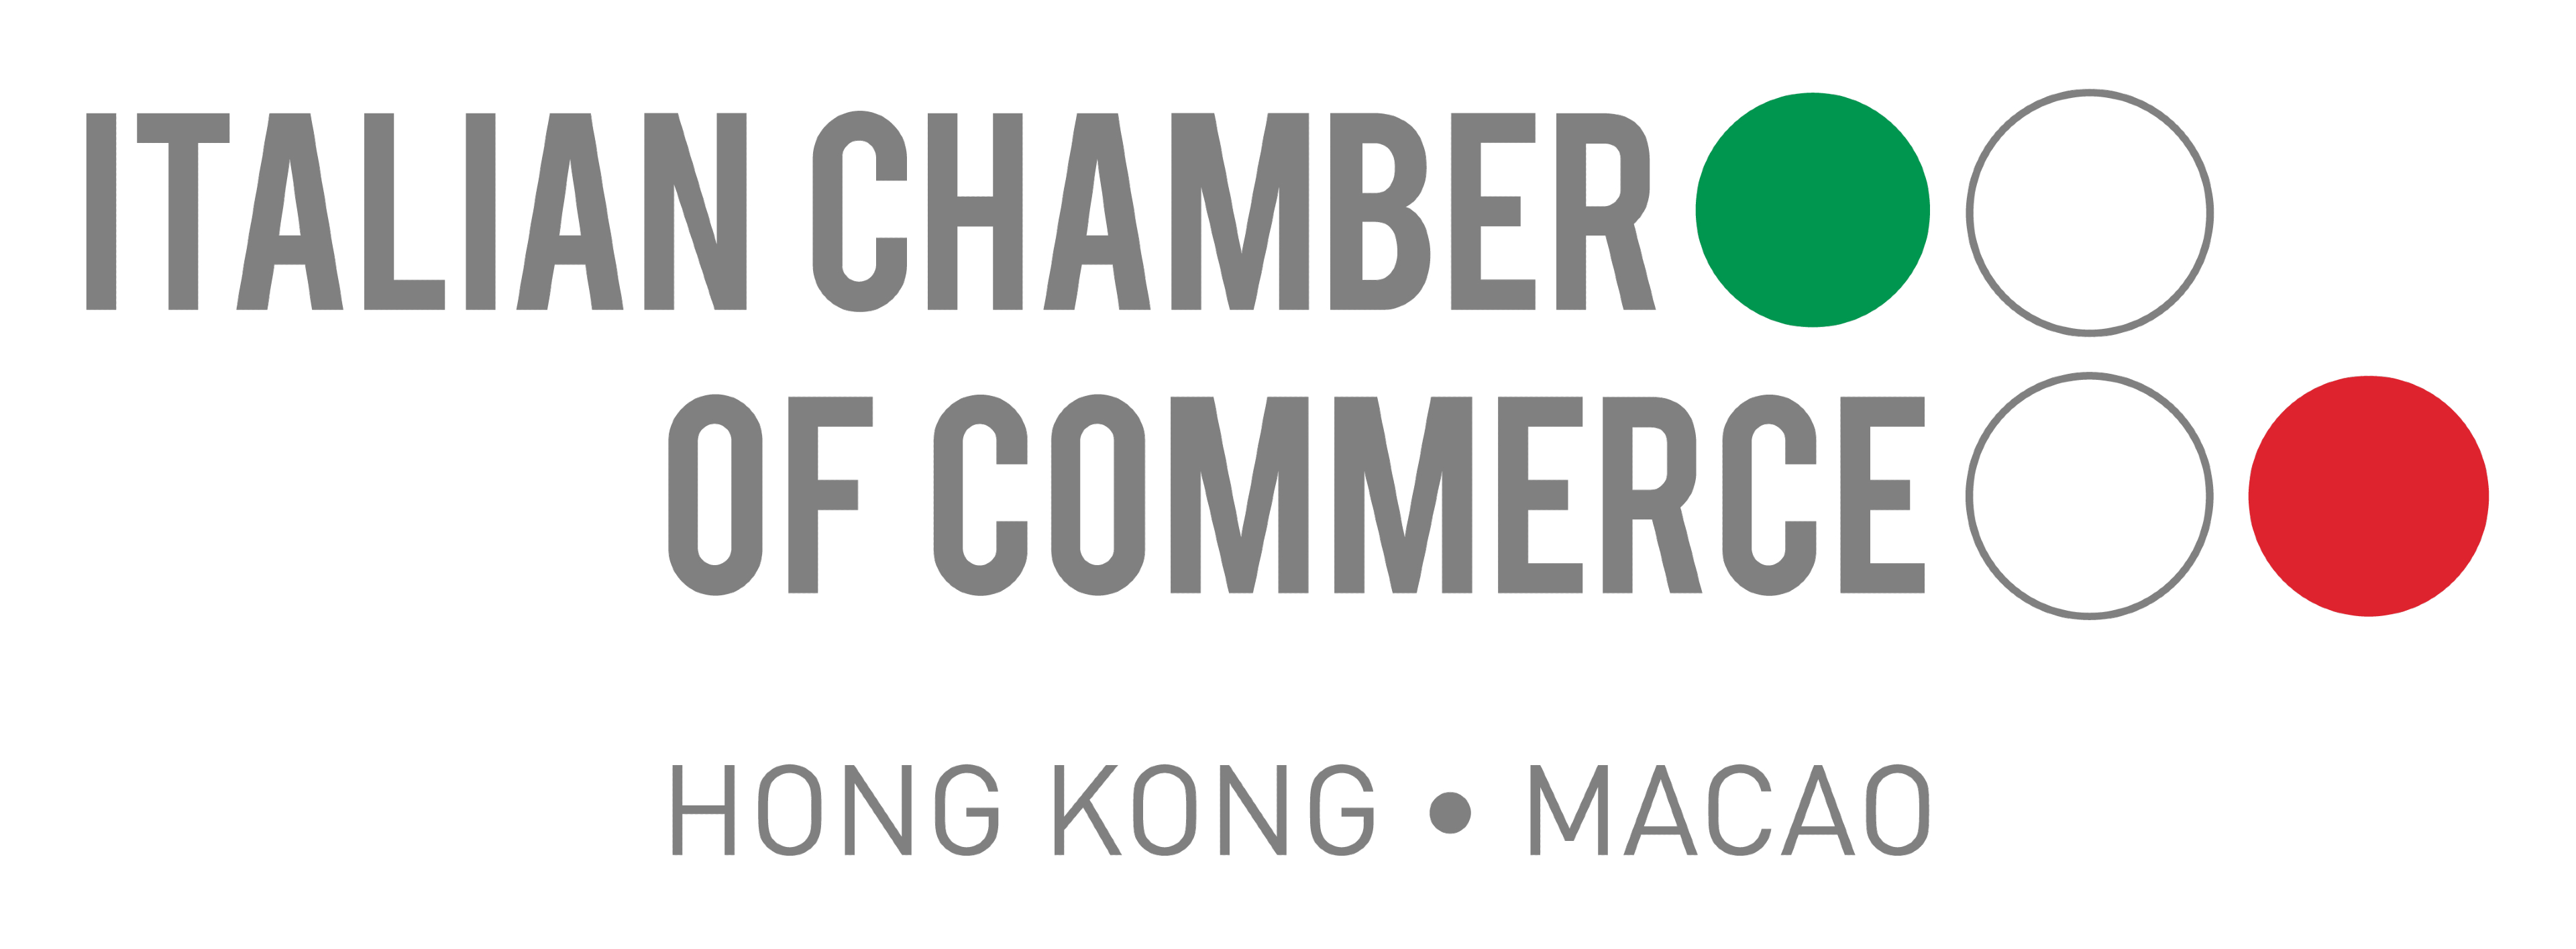 Italian Chamber of Commerce in Hong Kong and Macao